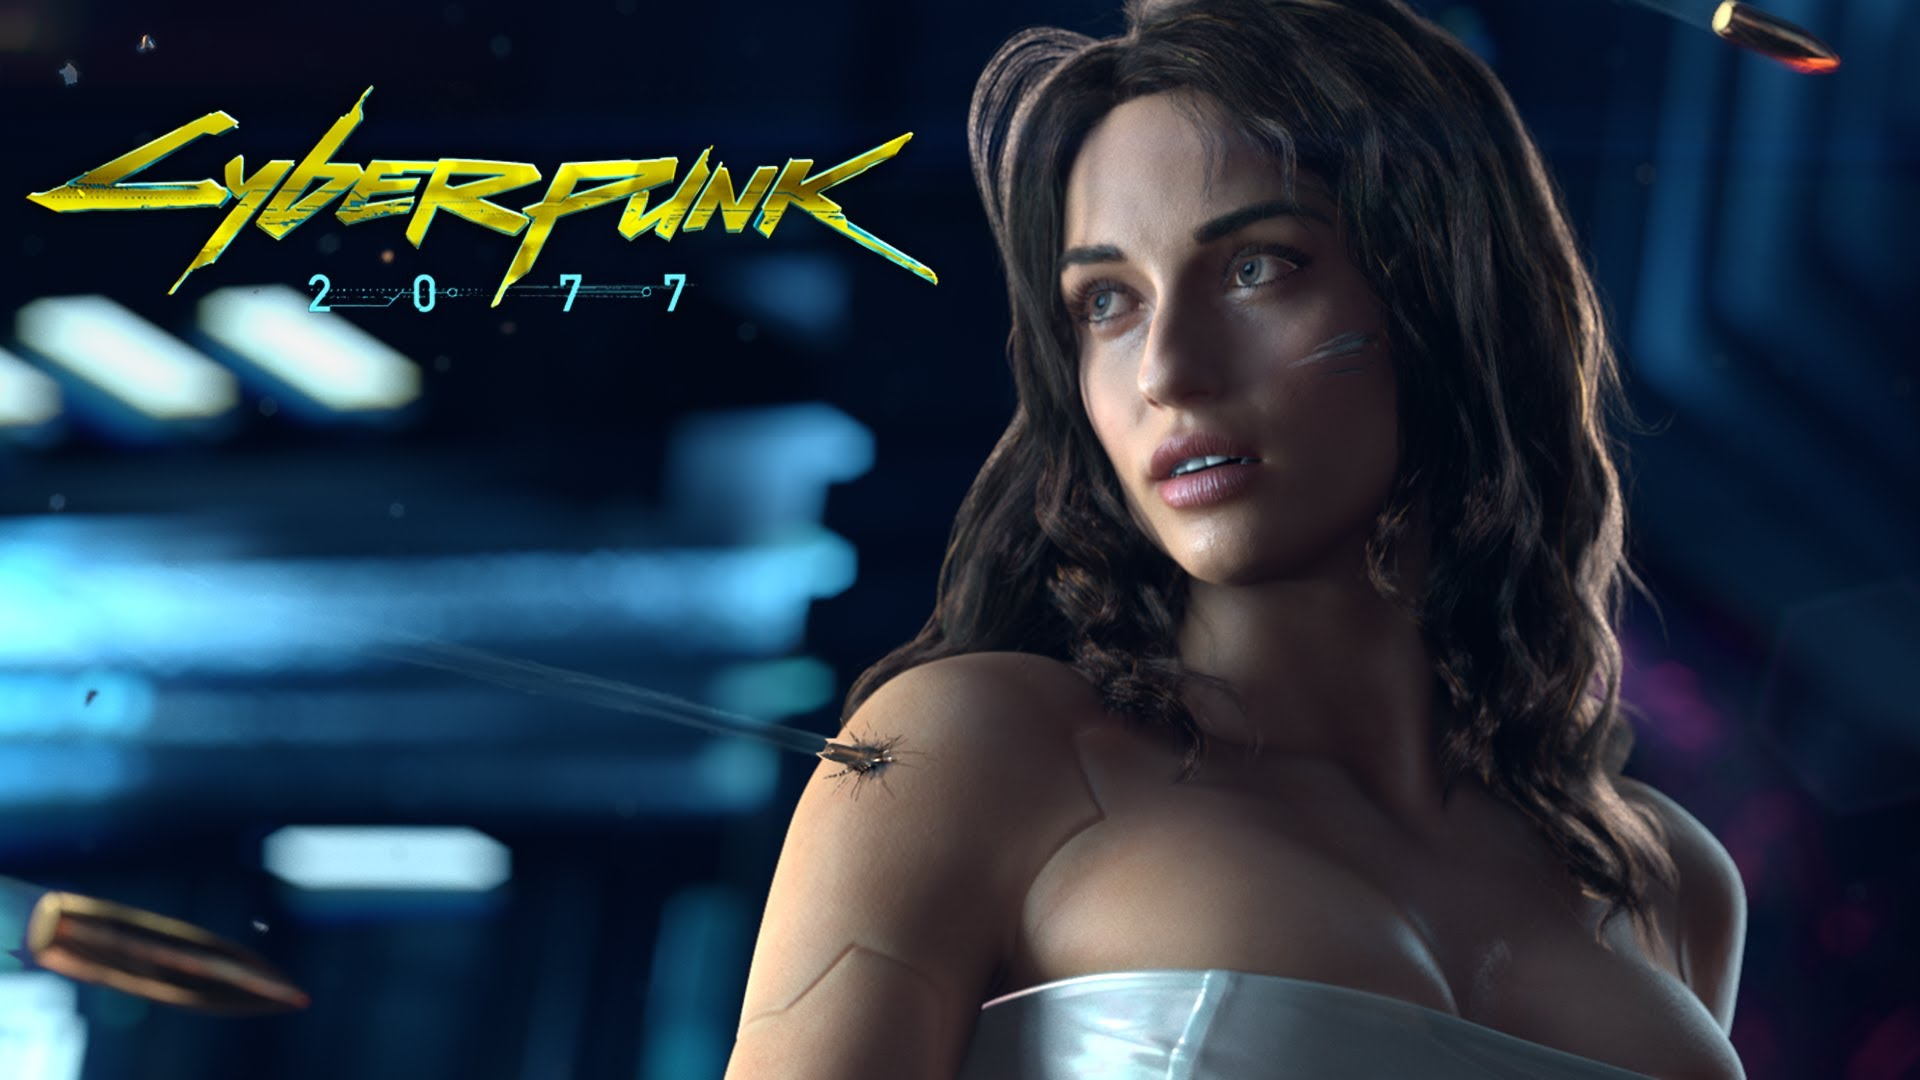 A screenshot of Cyberpunk 2077's DLC game as played in gaming pc.